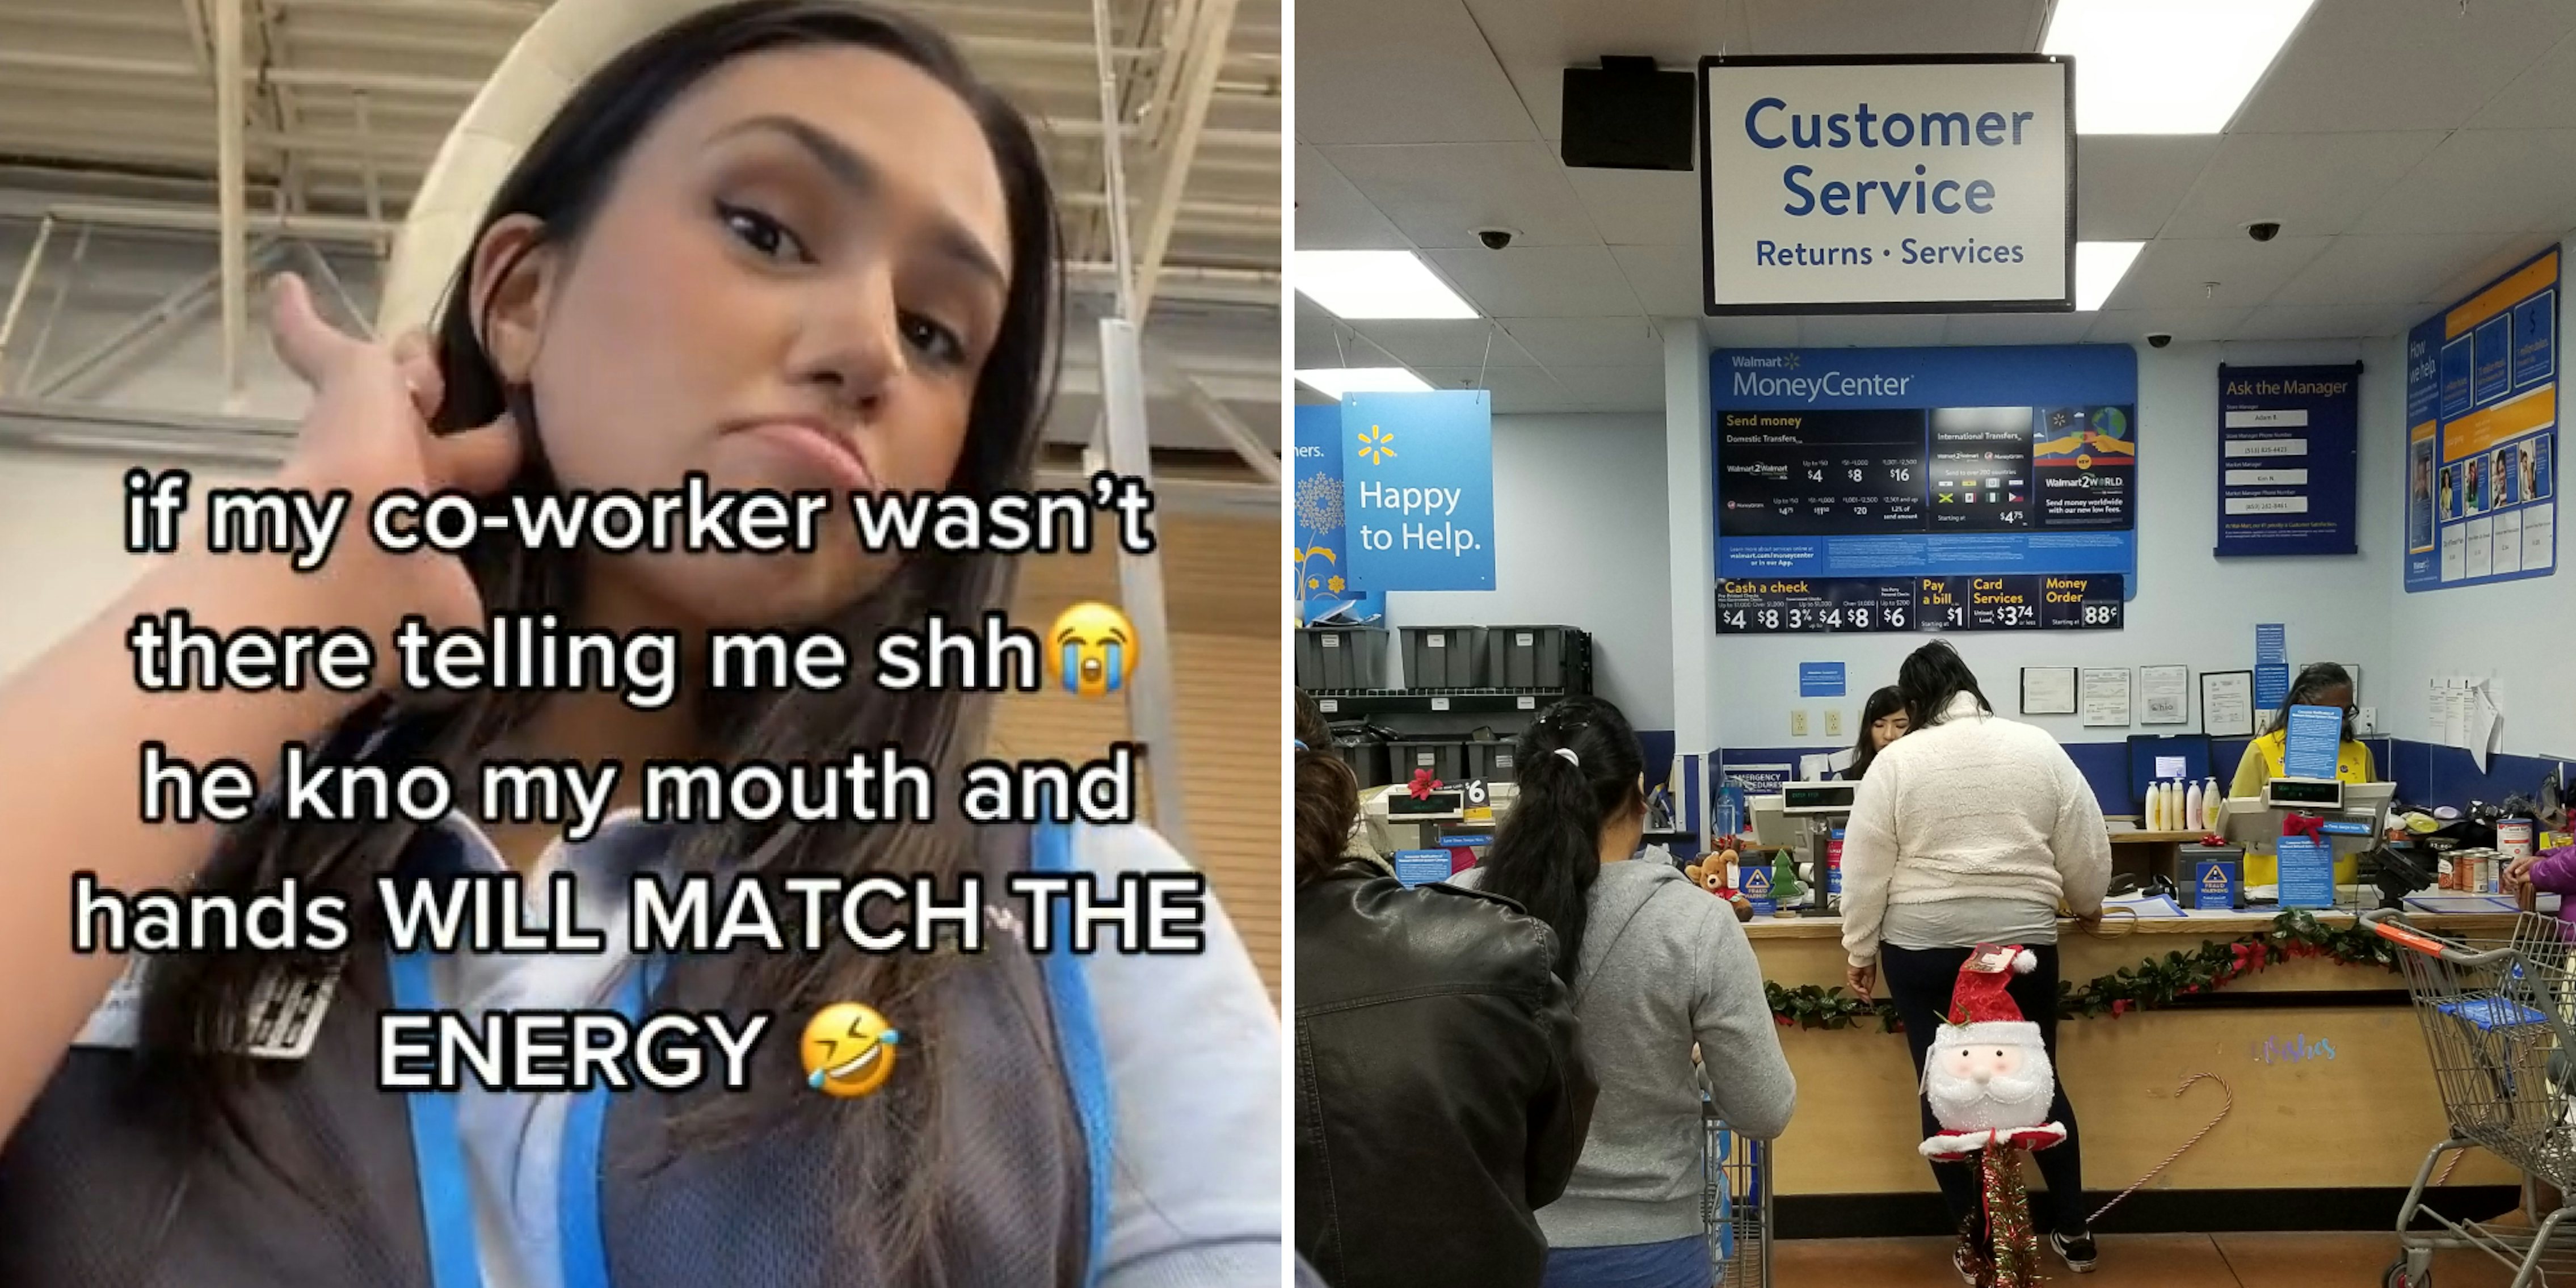 Walmart employee hand putting hair behind hear listening caption 'if my co-worker wasn't there telling me shh he kno my mouth and hands WILL MATCH THE ENERGY' (l) walmart customer service area with people in line and at register (r)